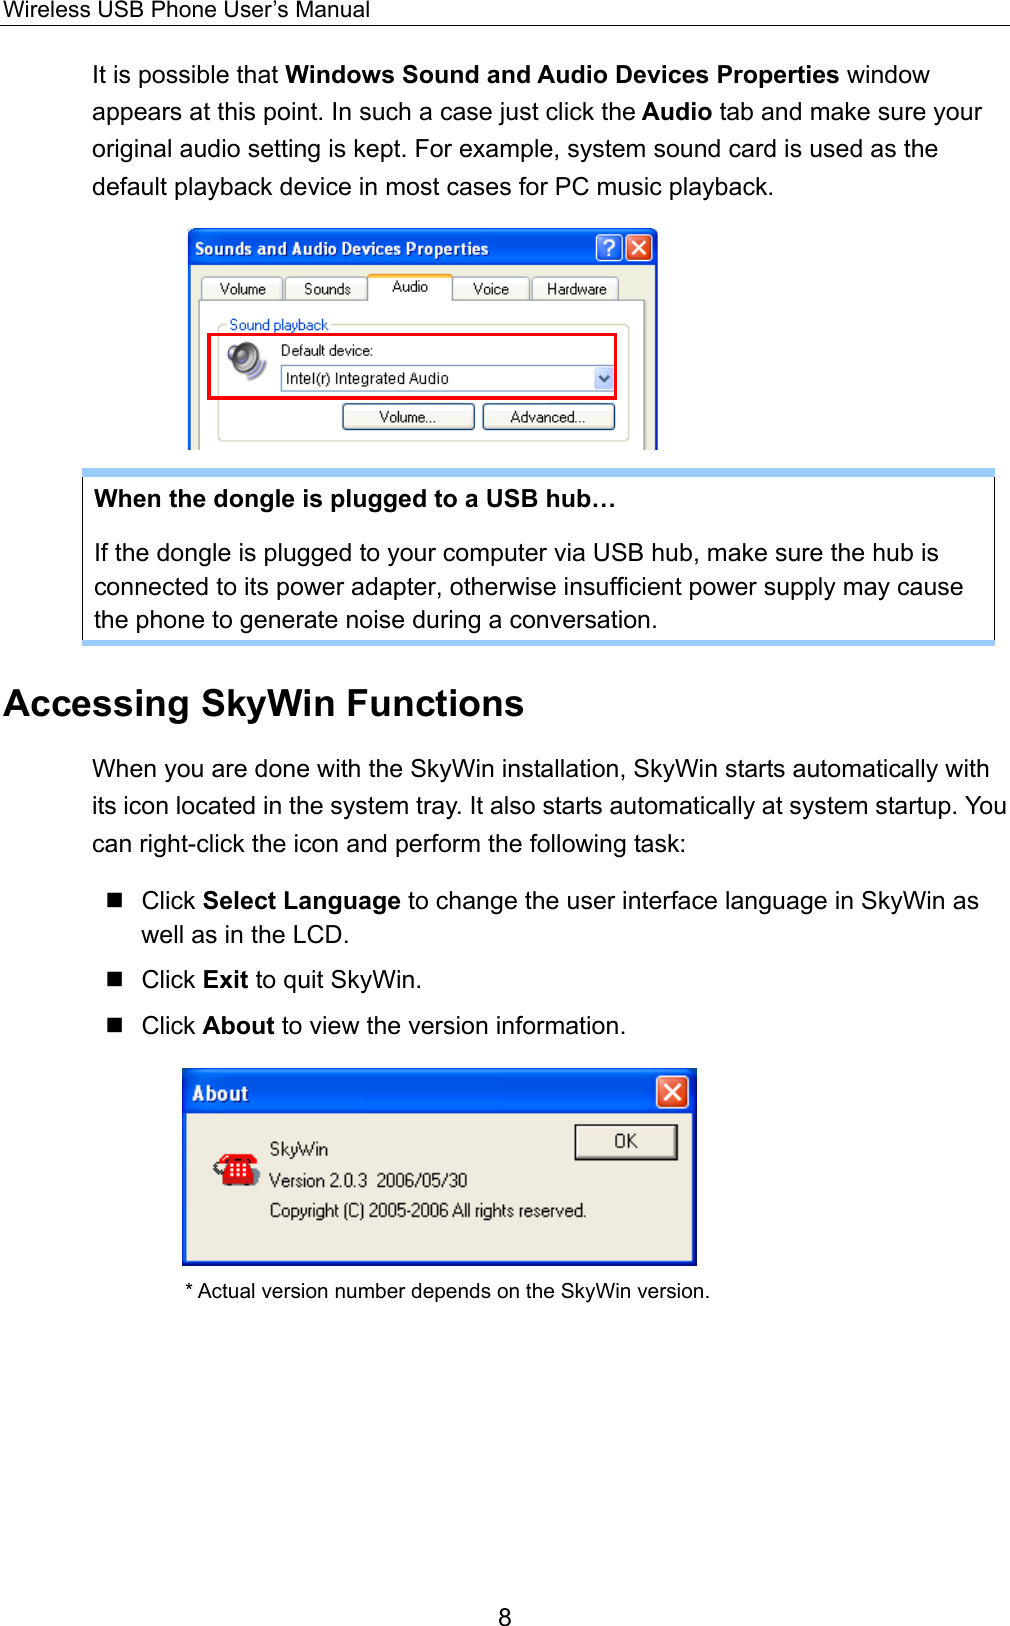 Wireless USB Phone User’s Manual It is possible that Windows Sound and Audio Devices Properties window appears at this point. In such a case just click the Audio tab and make sure your original audio setting is kept. For example, system sound card is used as the default playback device in most cases for PC music playback.     When the dongle is plugged to a USB hub… If the dongle is plugged to your computer via USB hub, make sure the hub is connected to its power adapter, otherwise insufficient power supply may cause the phone to generate noise during a conversation.   Accessing SkyWin Functions When you are done with the SkyWin installation, SkyWin starts automatically with its icon located in the system tray. It also starts automatically at system startup. You can right-click the icon and perform the following task:    Click Select Language to change the user interface language in SkyWin as well as in the LCD.  Click Exit to quit SkyWin.  Click About to view the version information.        * Actual version number depends on the SkyWin version. 8 